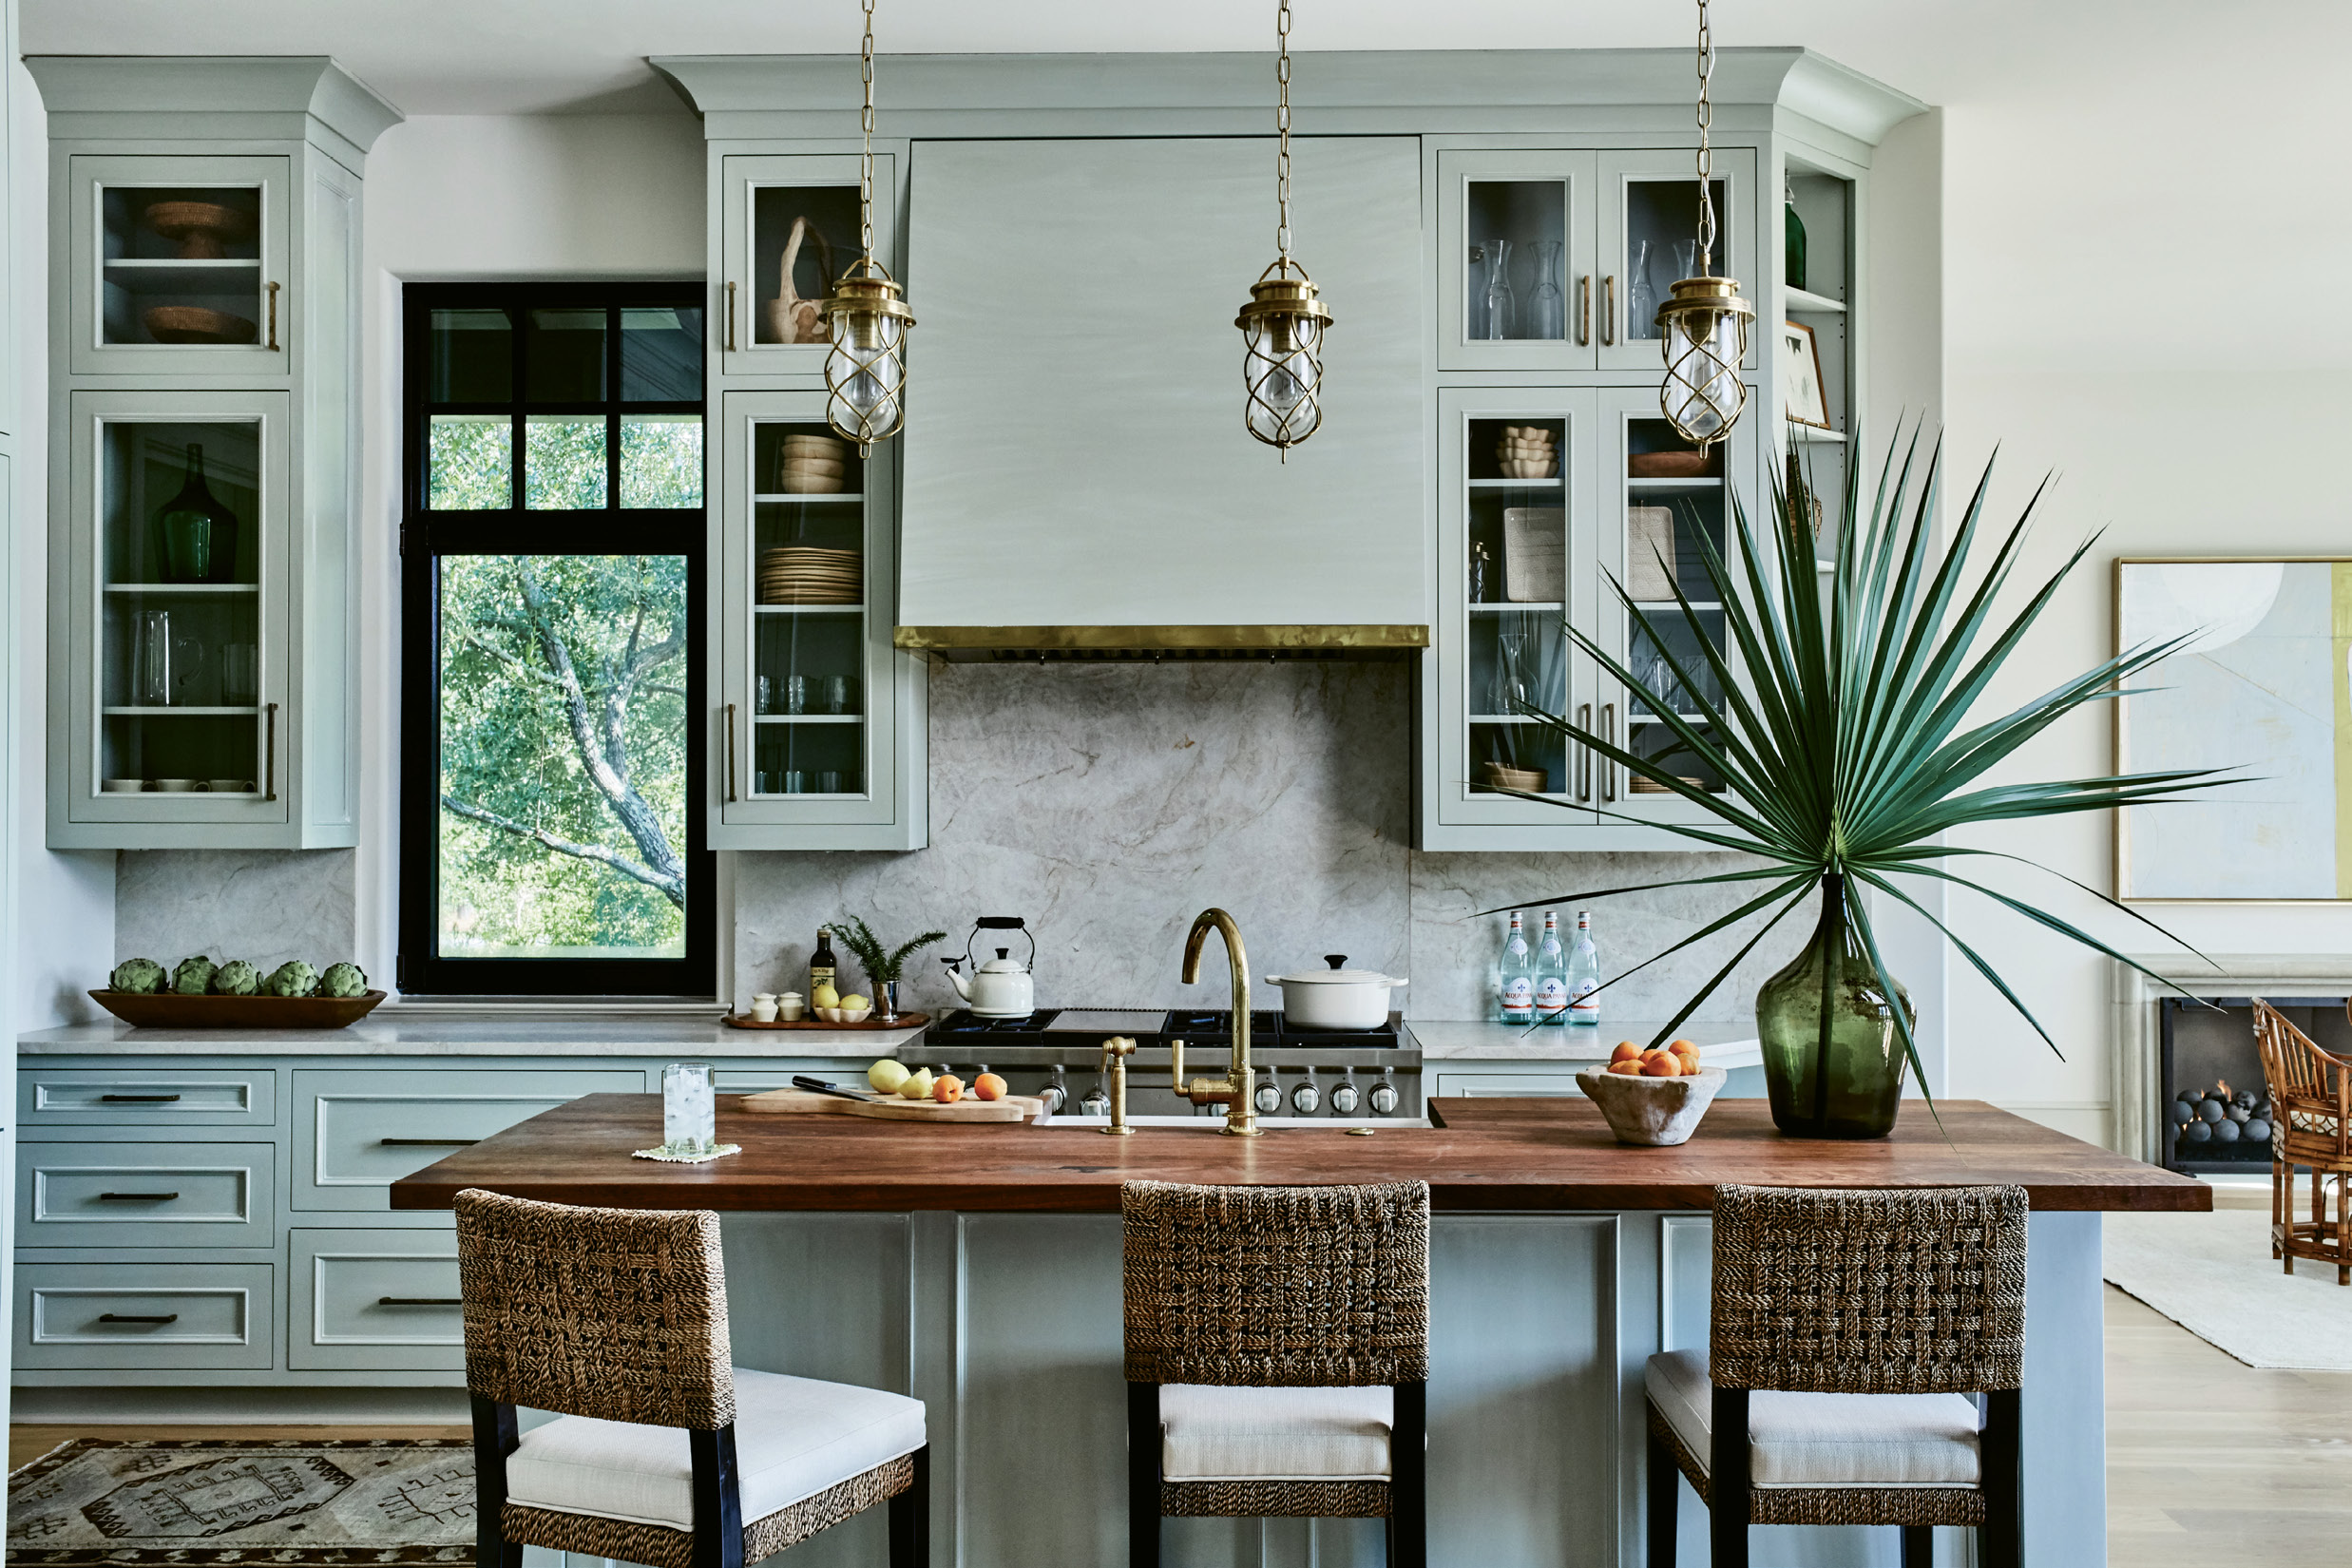 WARM &amp; INVITING: Brass accents—the faucet, pendant lighting, and custom trim around the hood—continue in the kitchen. “It complements the soft sage-green cabinetry and warms up the space,” says interior designer Charlotte Lucas. She chose quartzite for the countertops and backsplash for its hue and durability and walnut to top the island for additional warmth and interest.